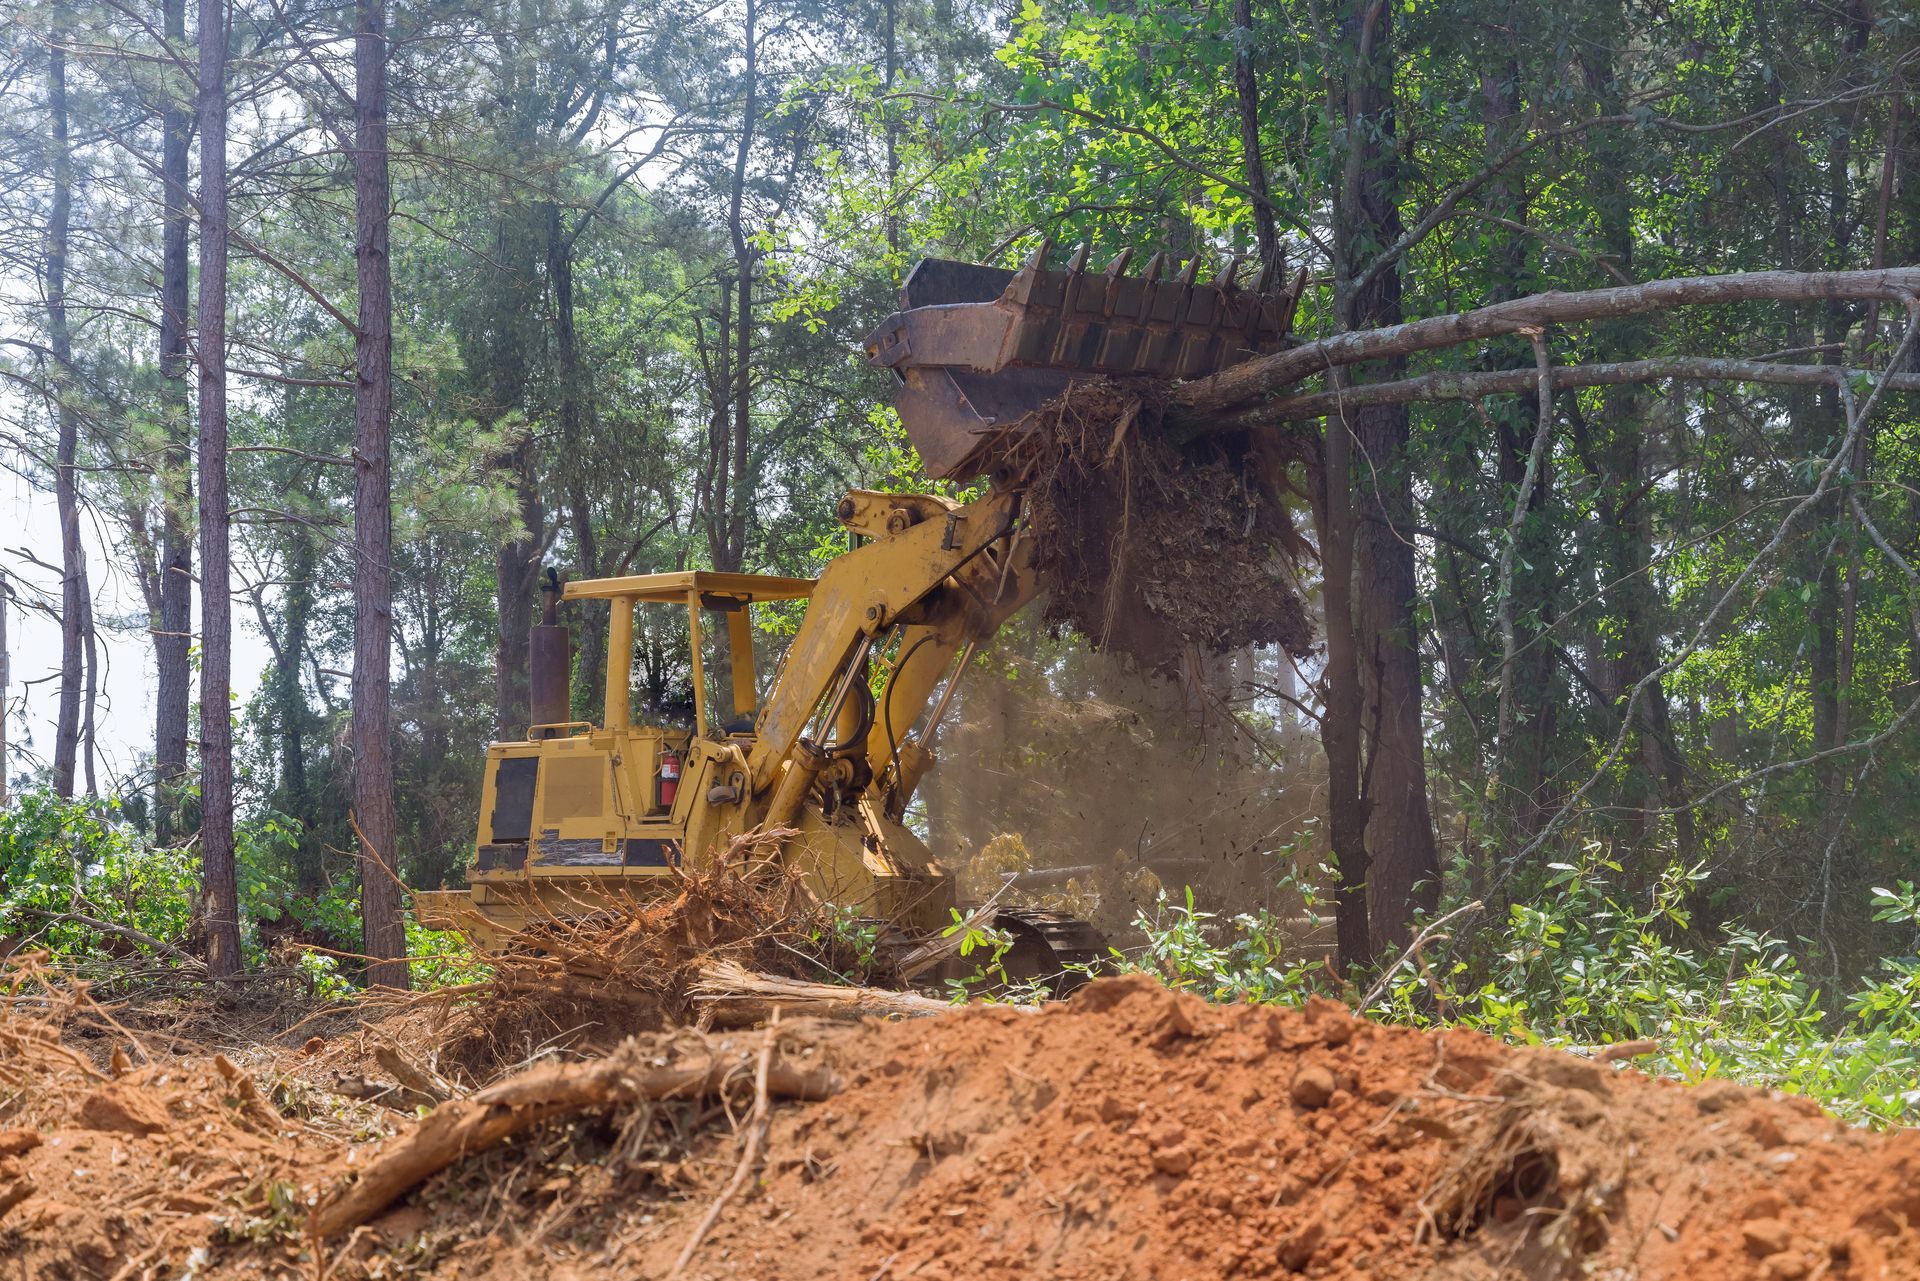 A yellow forestry mulcher lifting a fallen tree with its roots and dirt, showcasing land clearing in a wooded area.